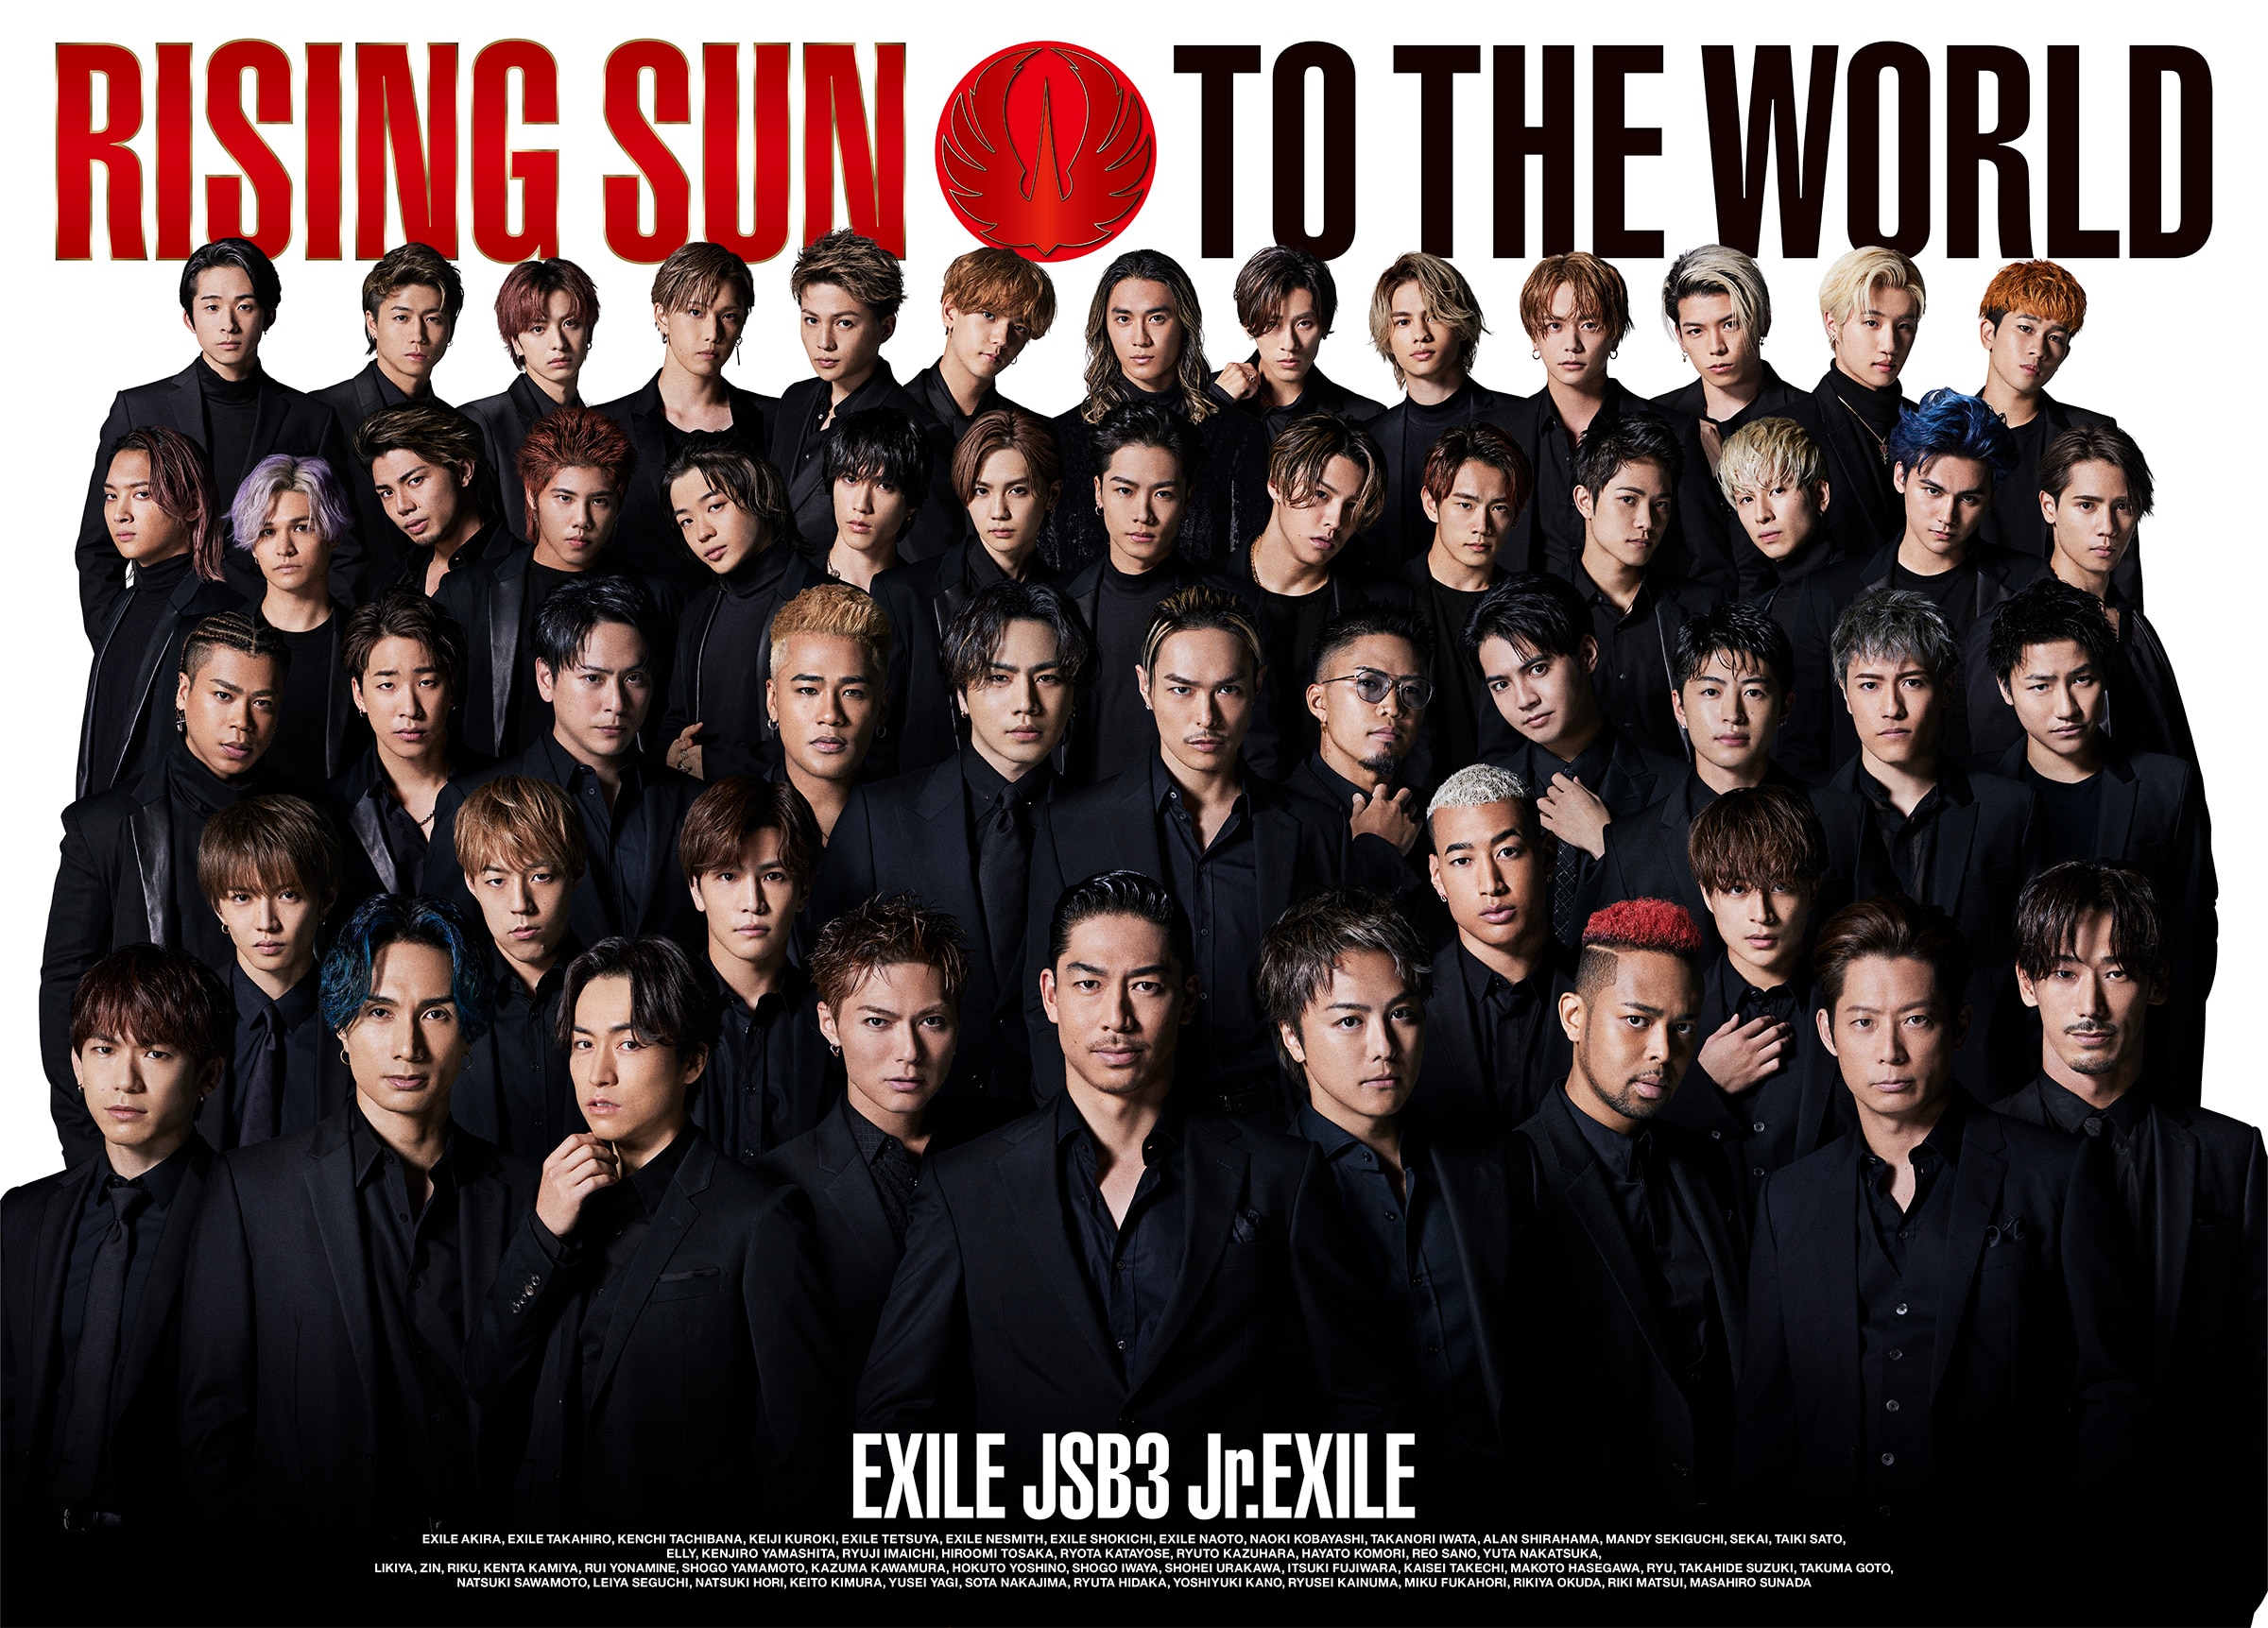 Discography 三代目j Soul Brothers From Exile Tribe Official Website